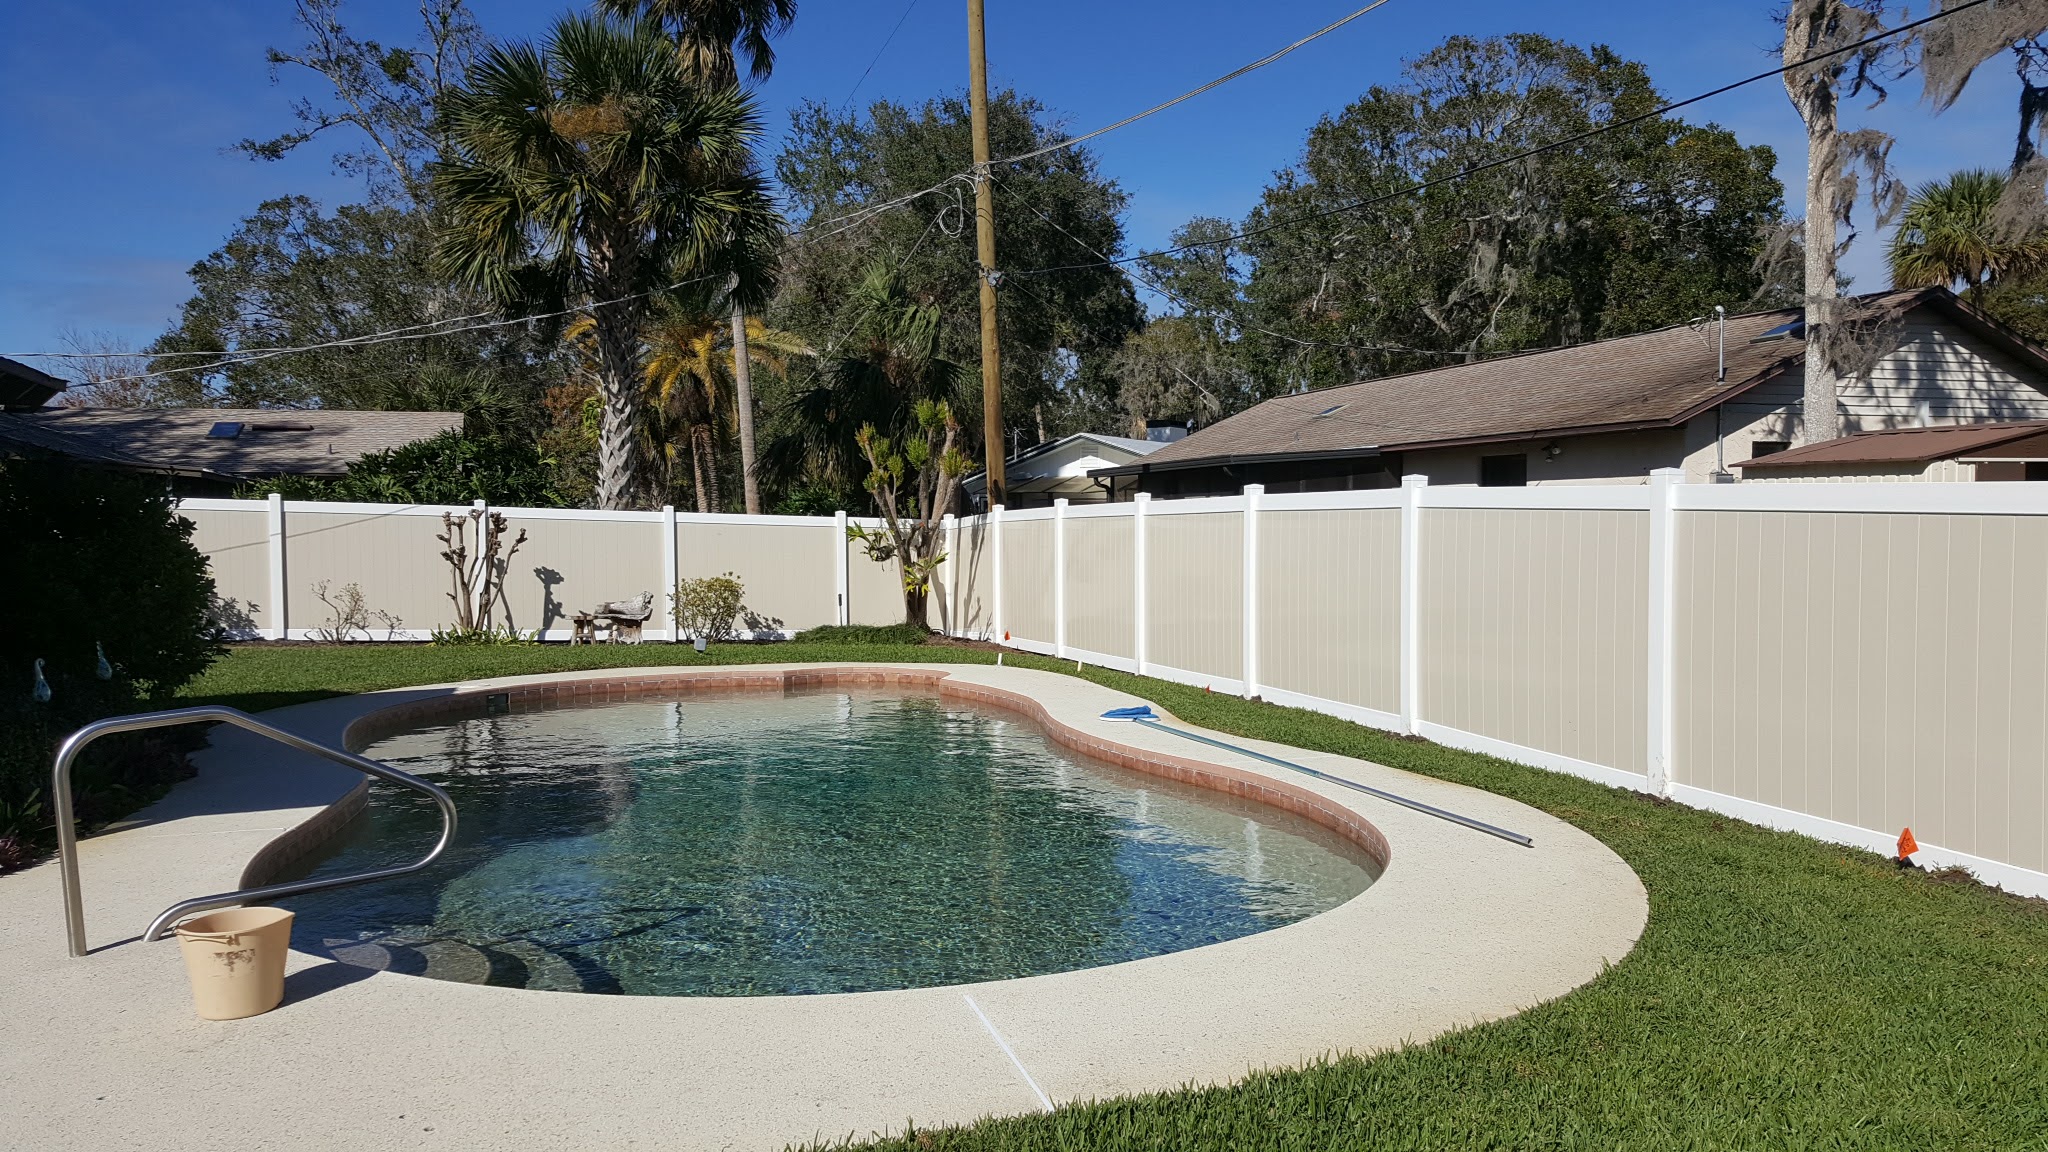 Residential Fence Installation around a pool in ocala florida.